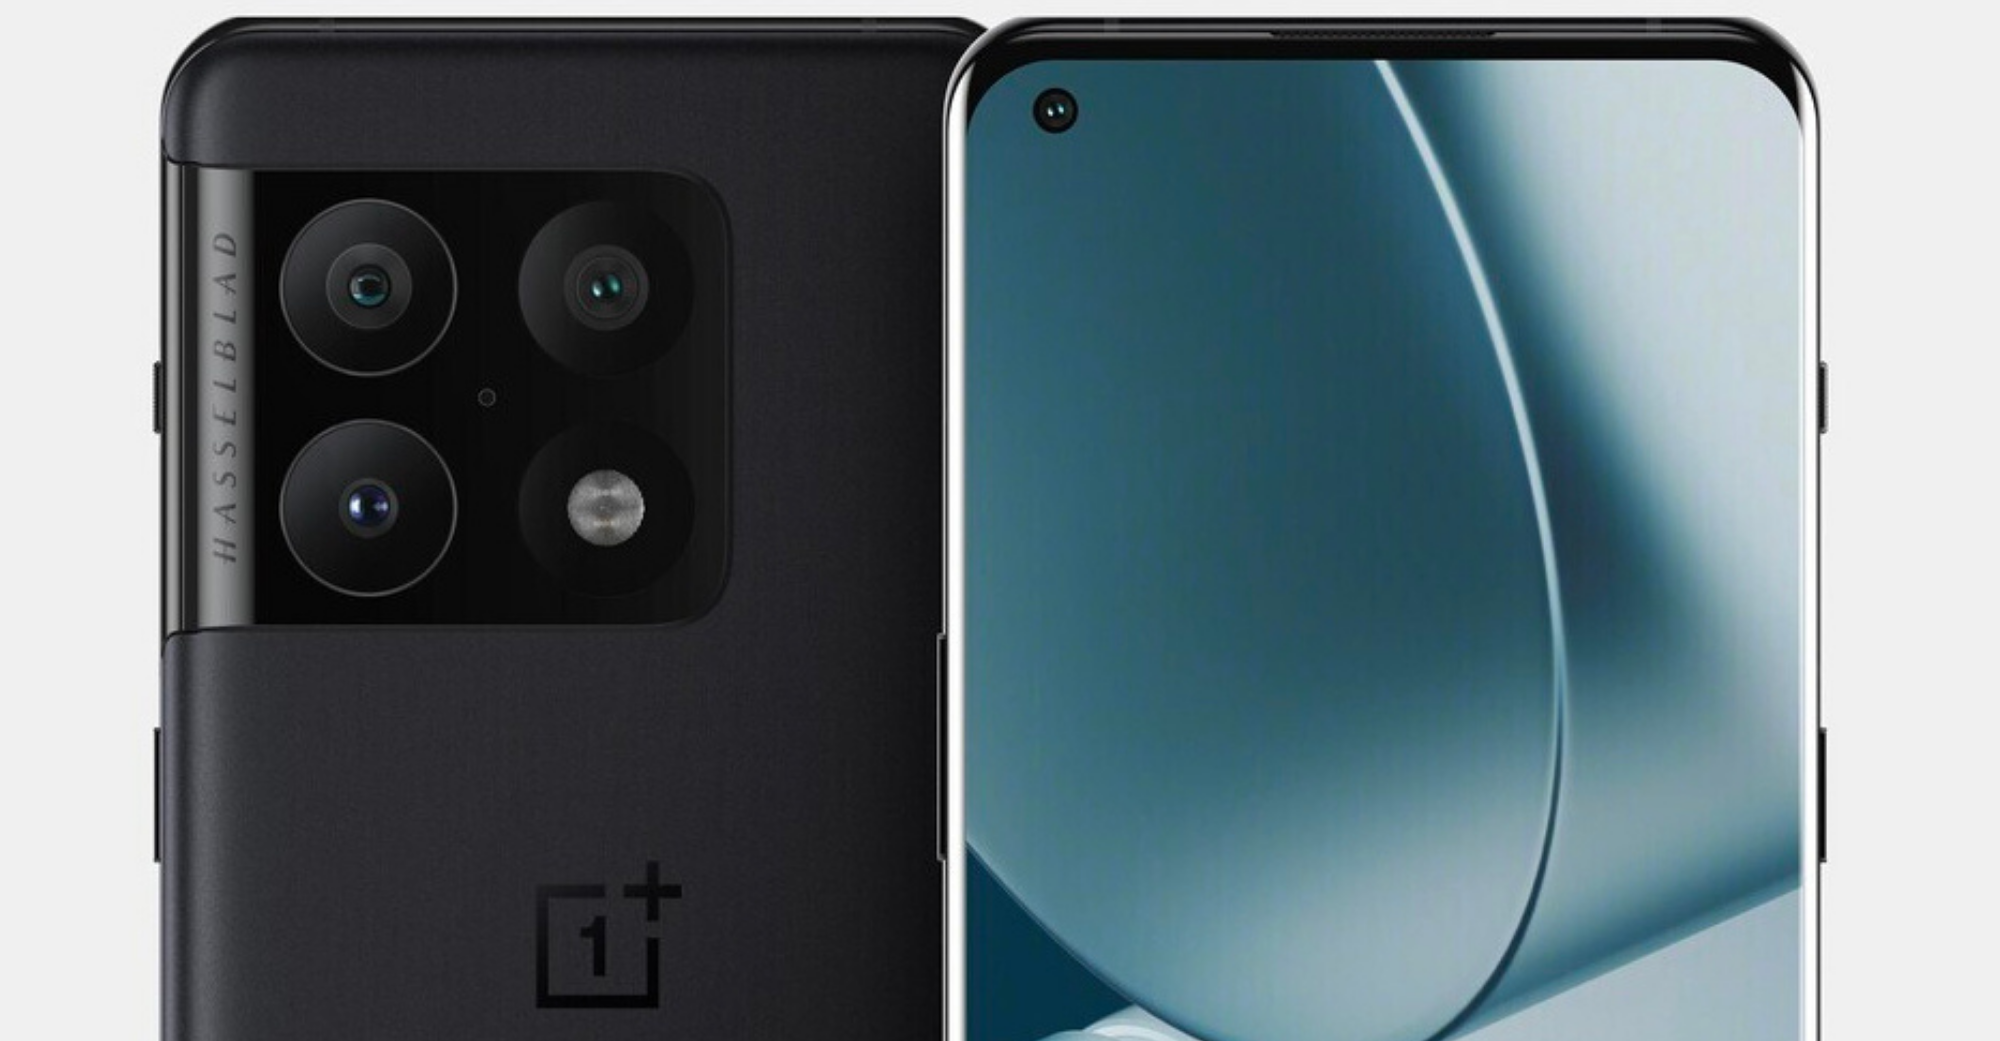 OnePlus 10 Pro Leak: Equipped With 2K/120Hz AMOLED Screen And 48MP Primary Camera